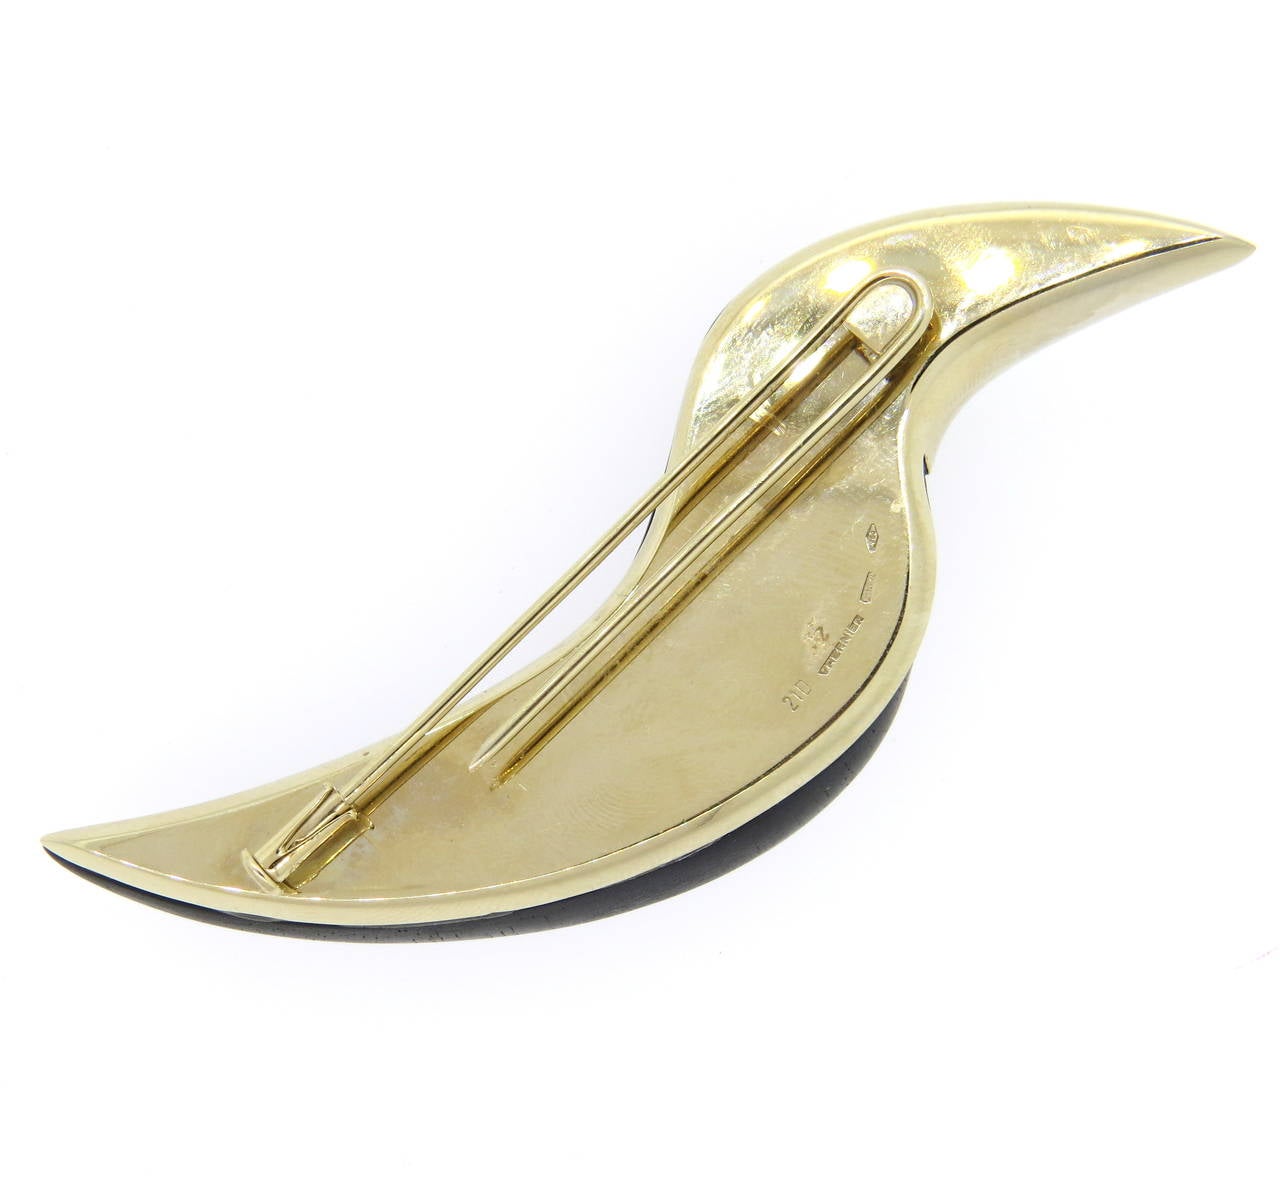 18k gold brooch, crafted by Vhernier, depicting tucane bird, decorated with black jet and diamonds. Brooch measures 80mm x 30mm. Marked 210, Vhernier, 750, Italian mark. Weight - 39.4 grams